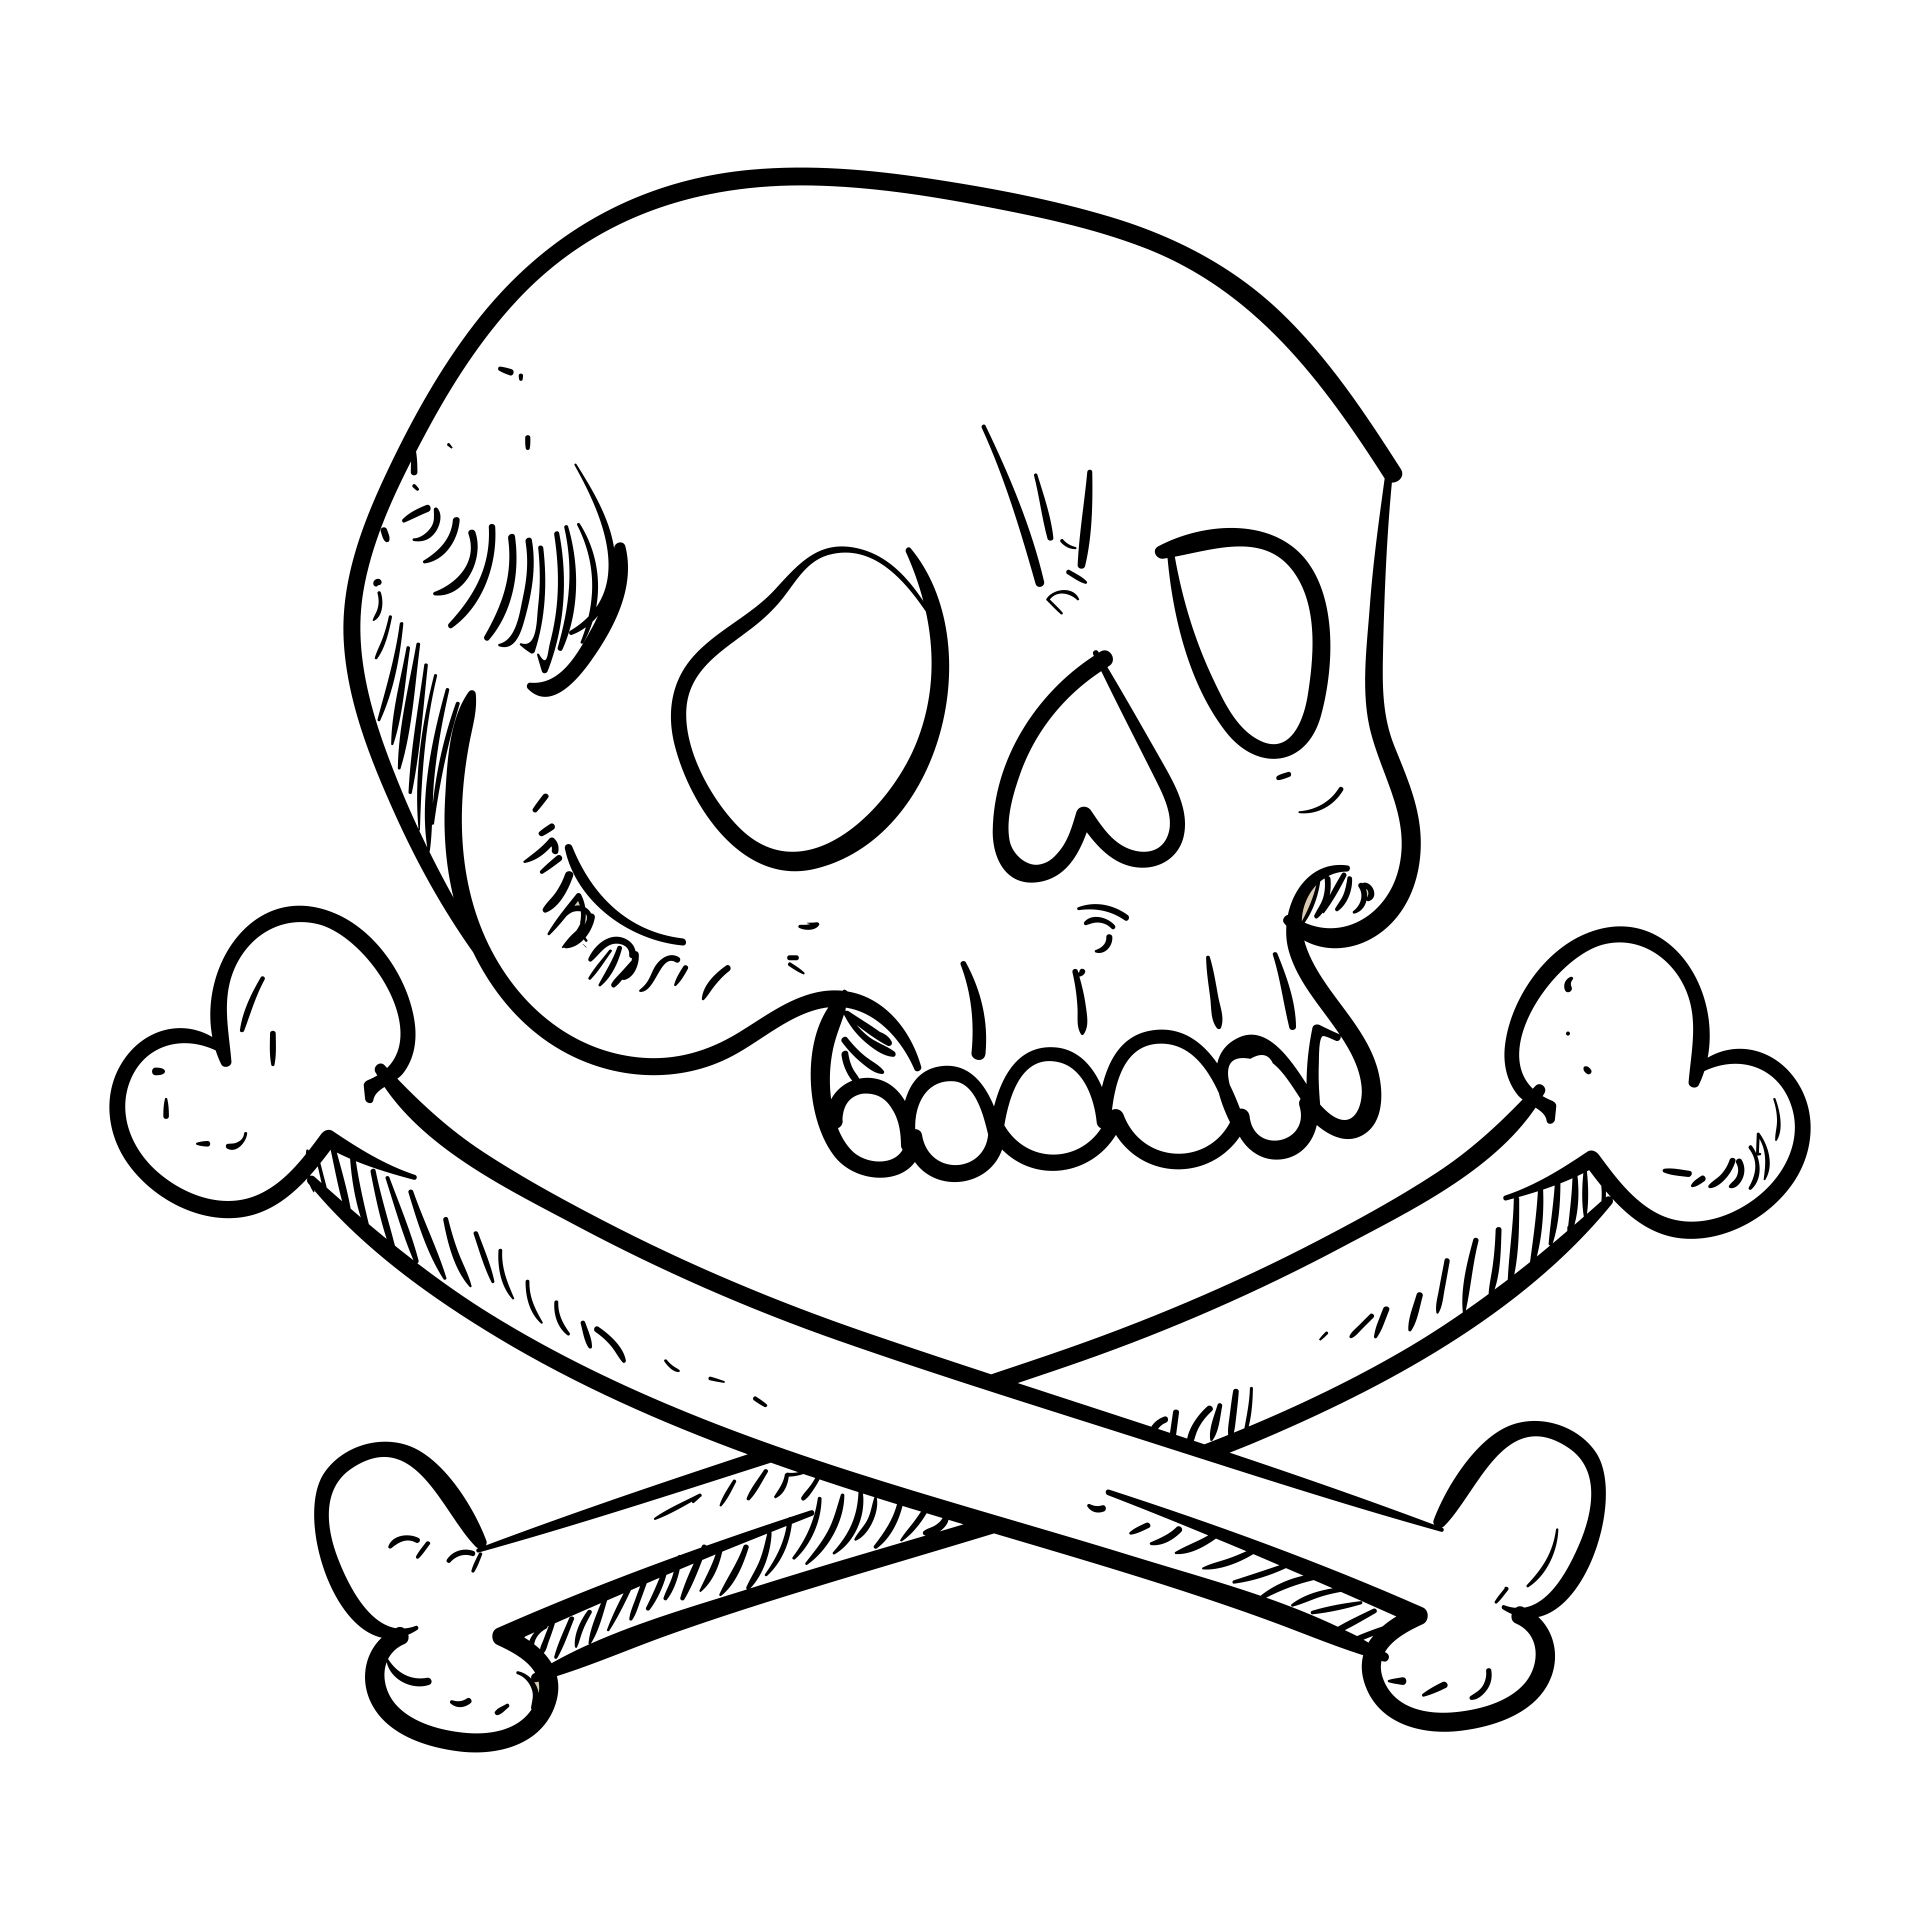 Simple Skull Coloring Pages